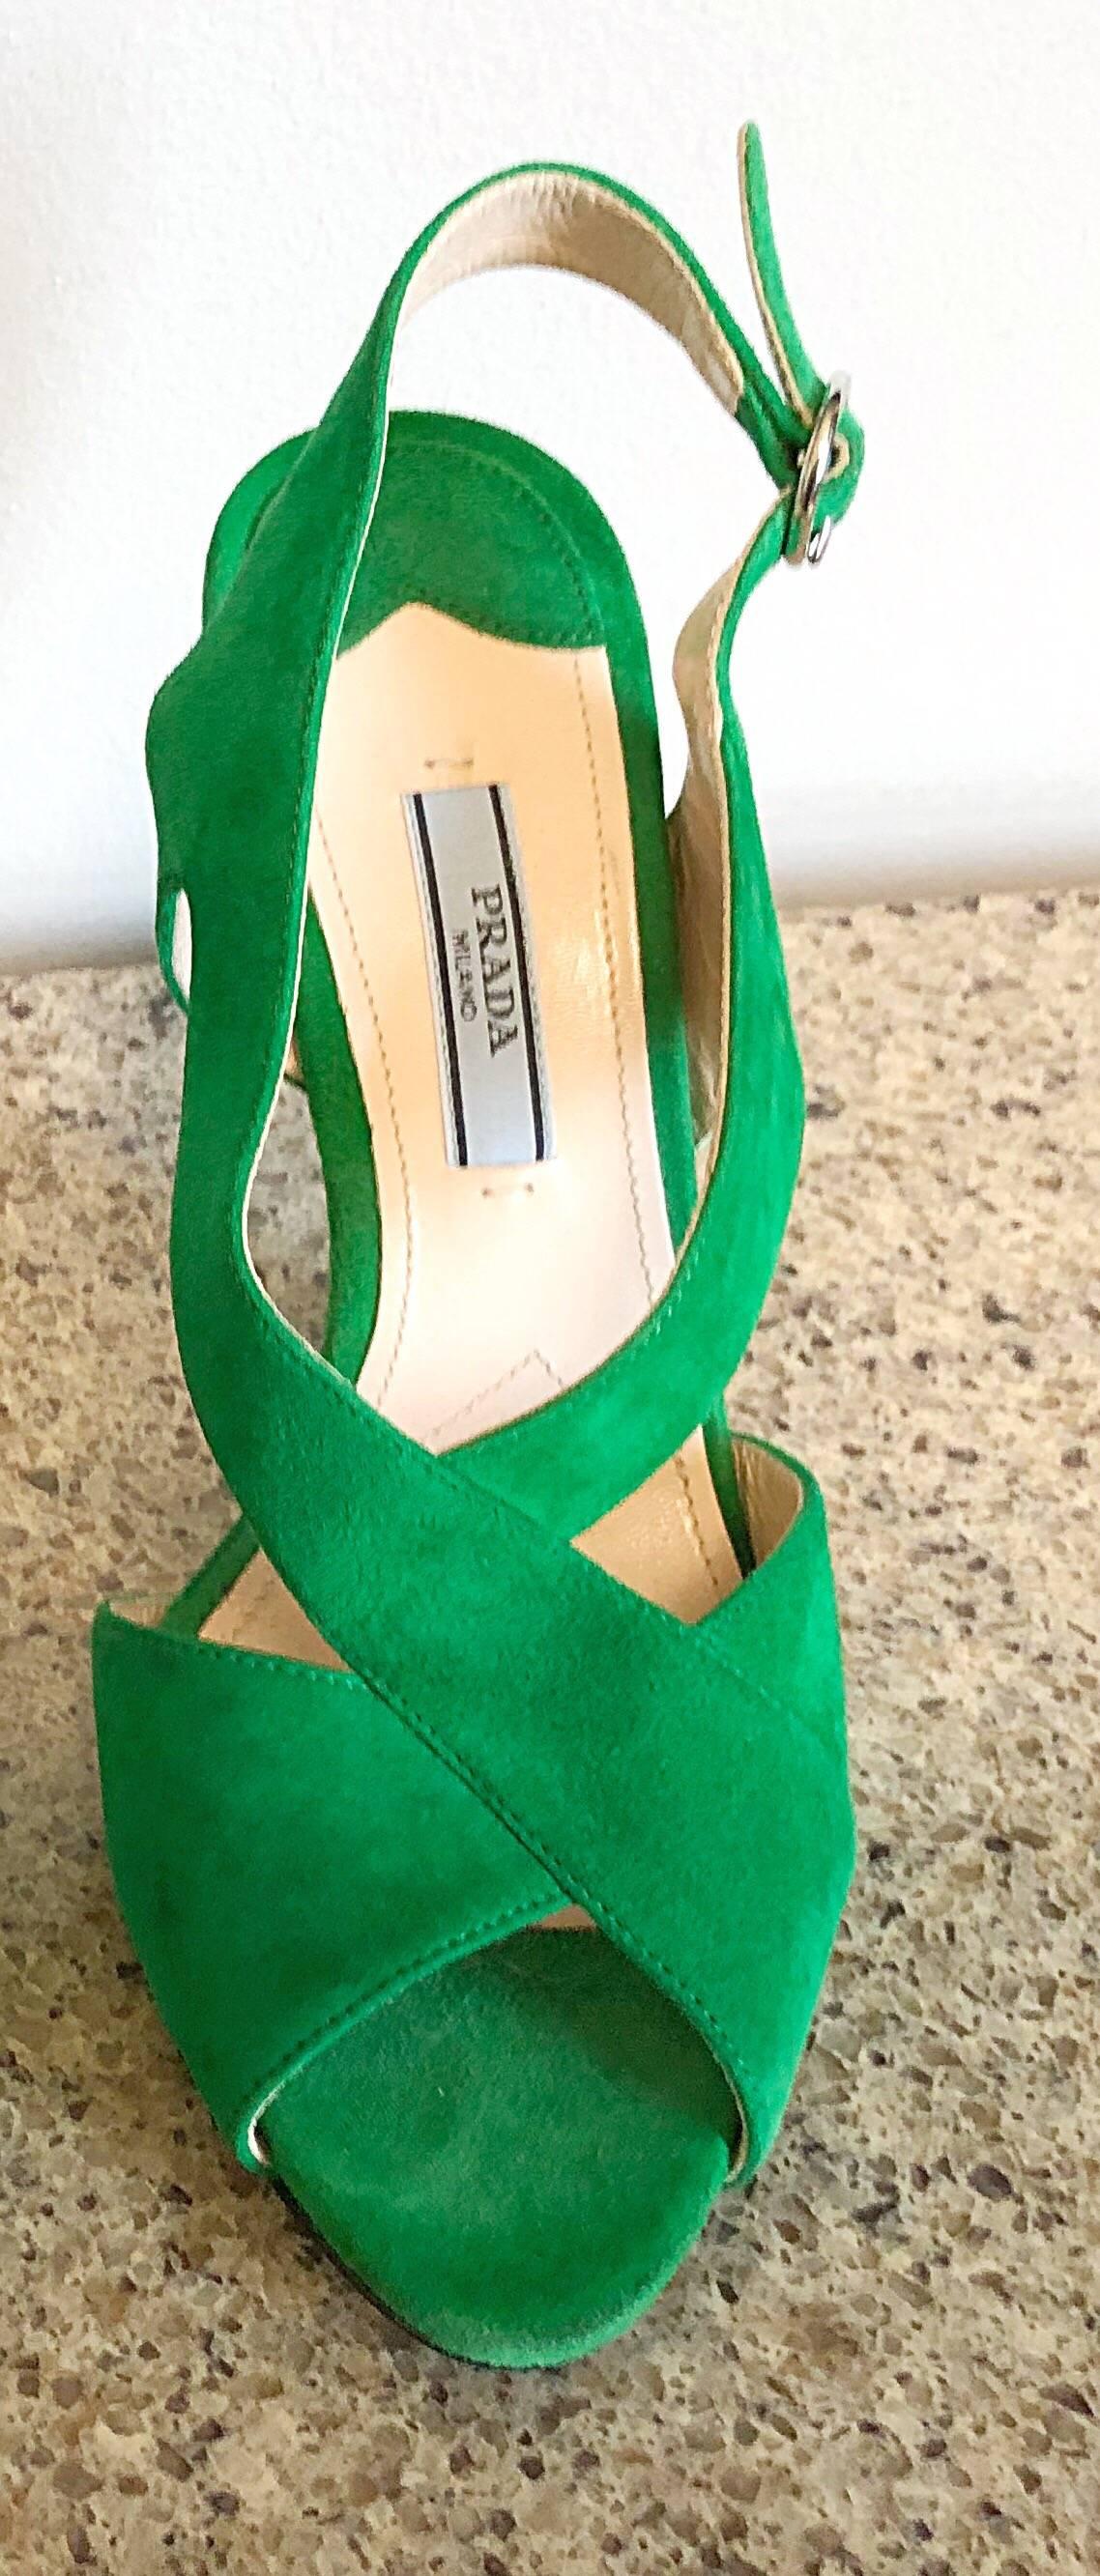 Fabulous brand new PRADA kelly green runway open toe heels! Vibrant green color on an architecturally appealing design. Adjustable strap can fit an array of ankle sizes. Extremely comfortable shoes that are easy to wear all day. The perfect pop of